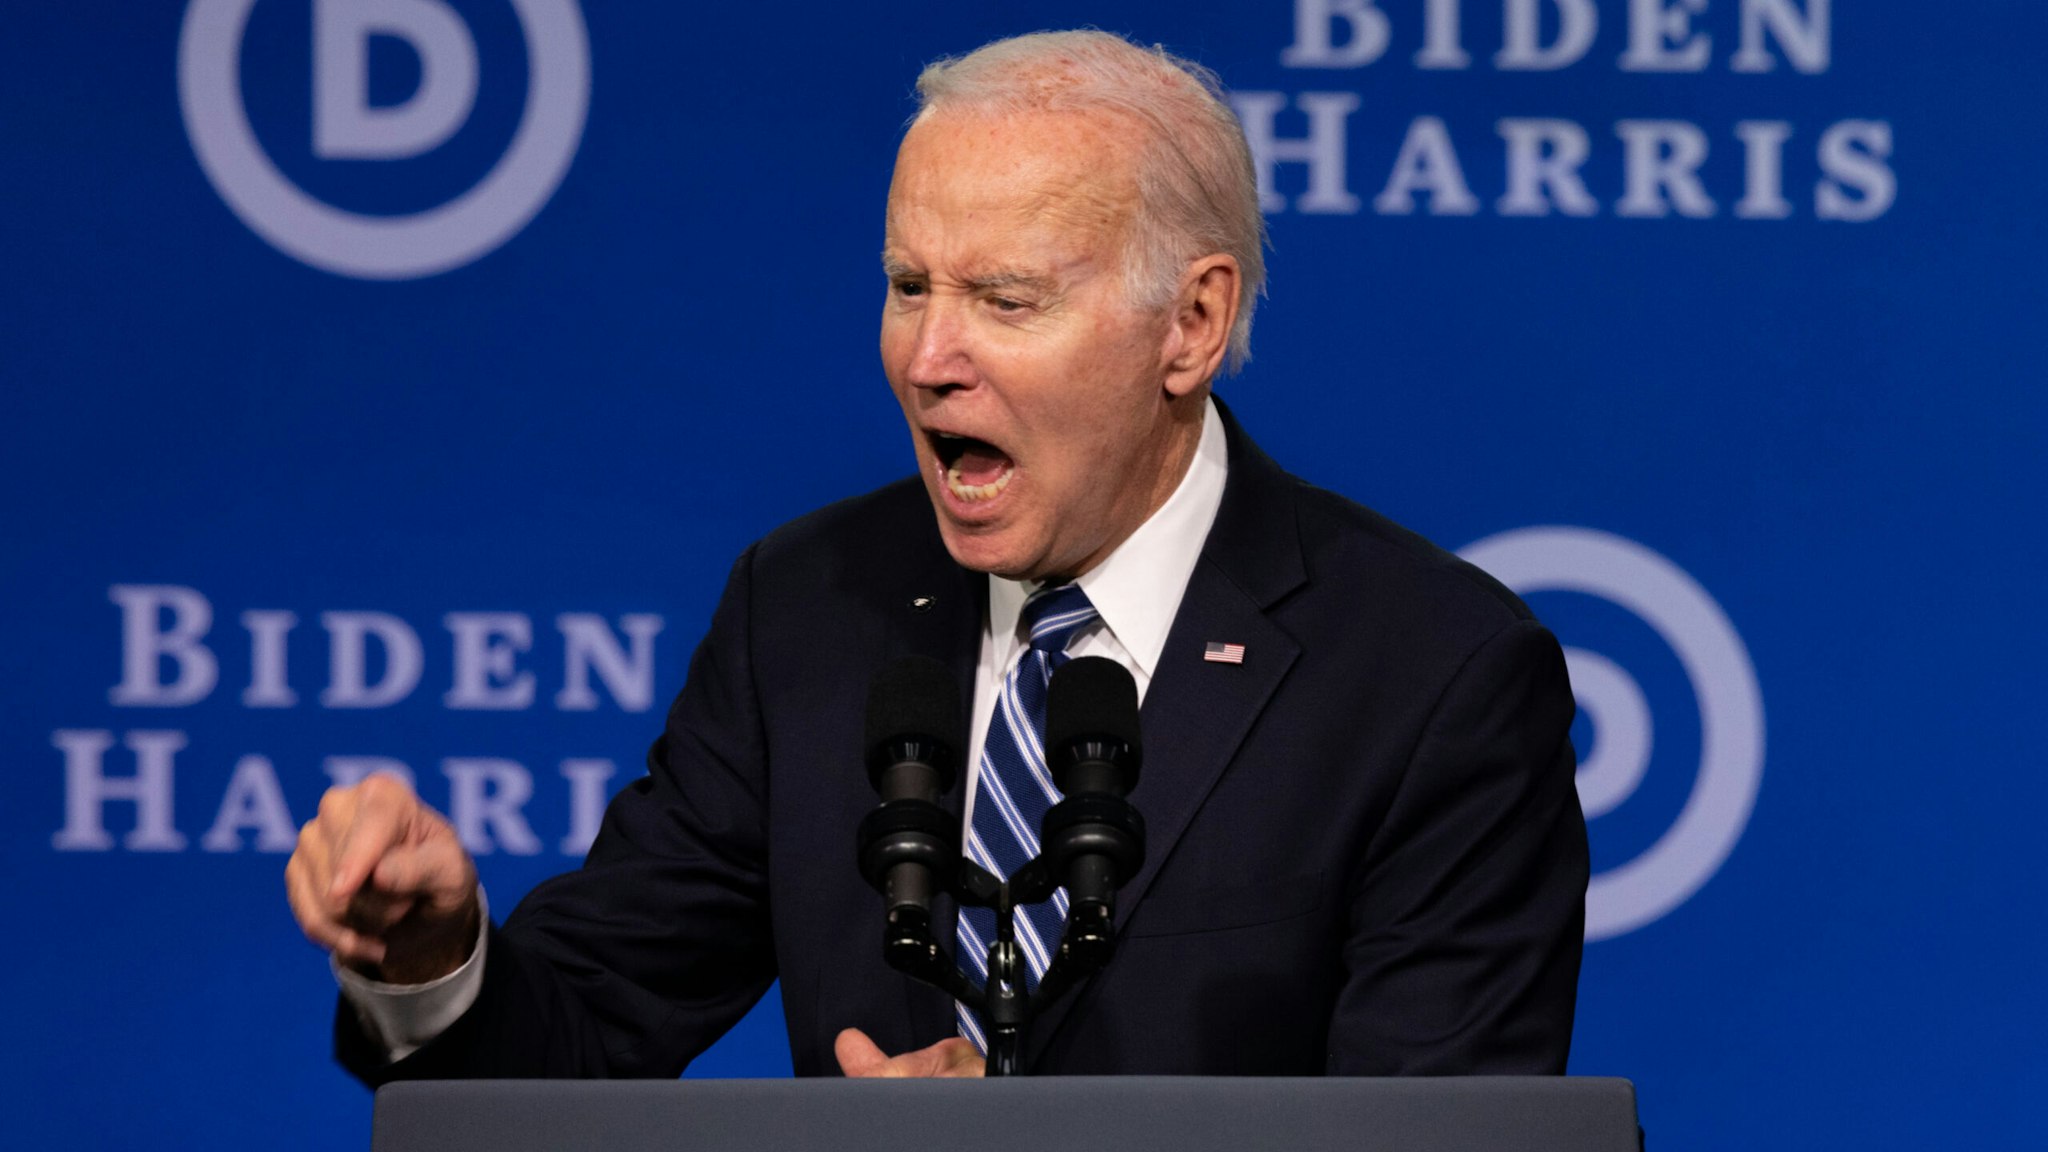 US President Joe Biden gestures as he speaks during the Democratic National Committee winter meeting in Philadelphia, US, on Friday, Feb. 3, 2023. Biden's budget director said this week she thinks Republicans and Democrats will eventually reach a budget deal and avert a breach of the debt ceiling.